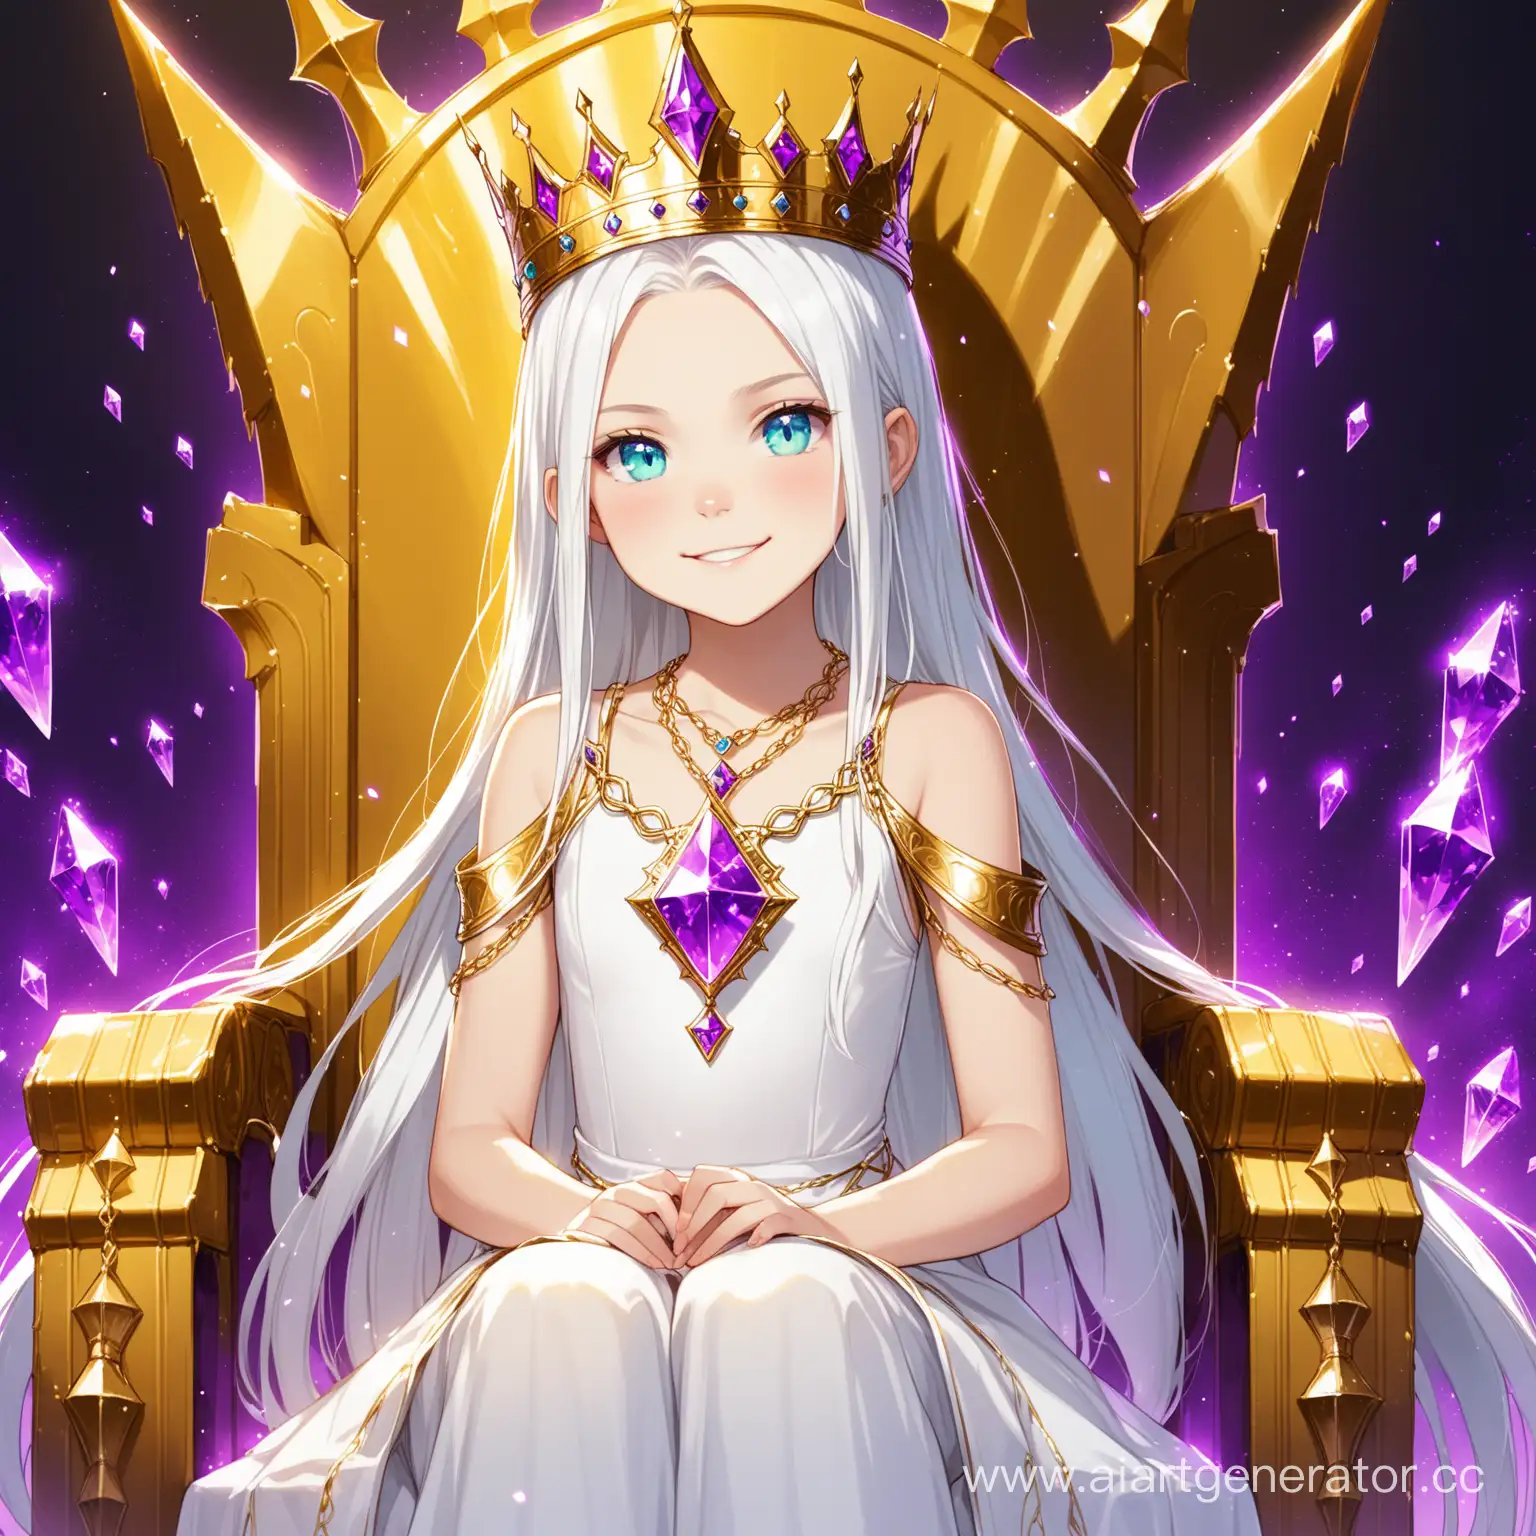 Enigmatic-Teen-Queen-on-Golden-Throne-with-Turquoise-Eyes-and-Violet-Crystal-Necklace